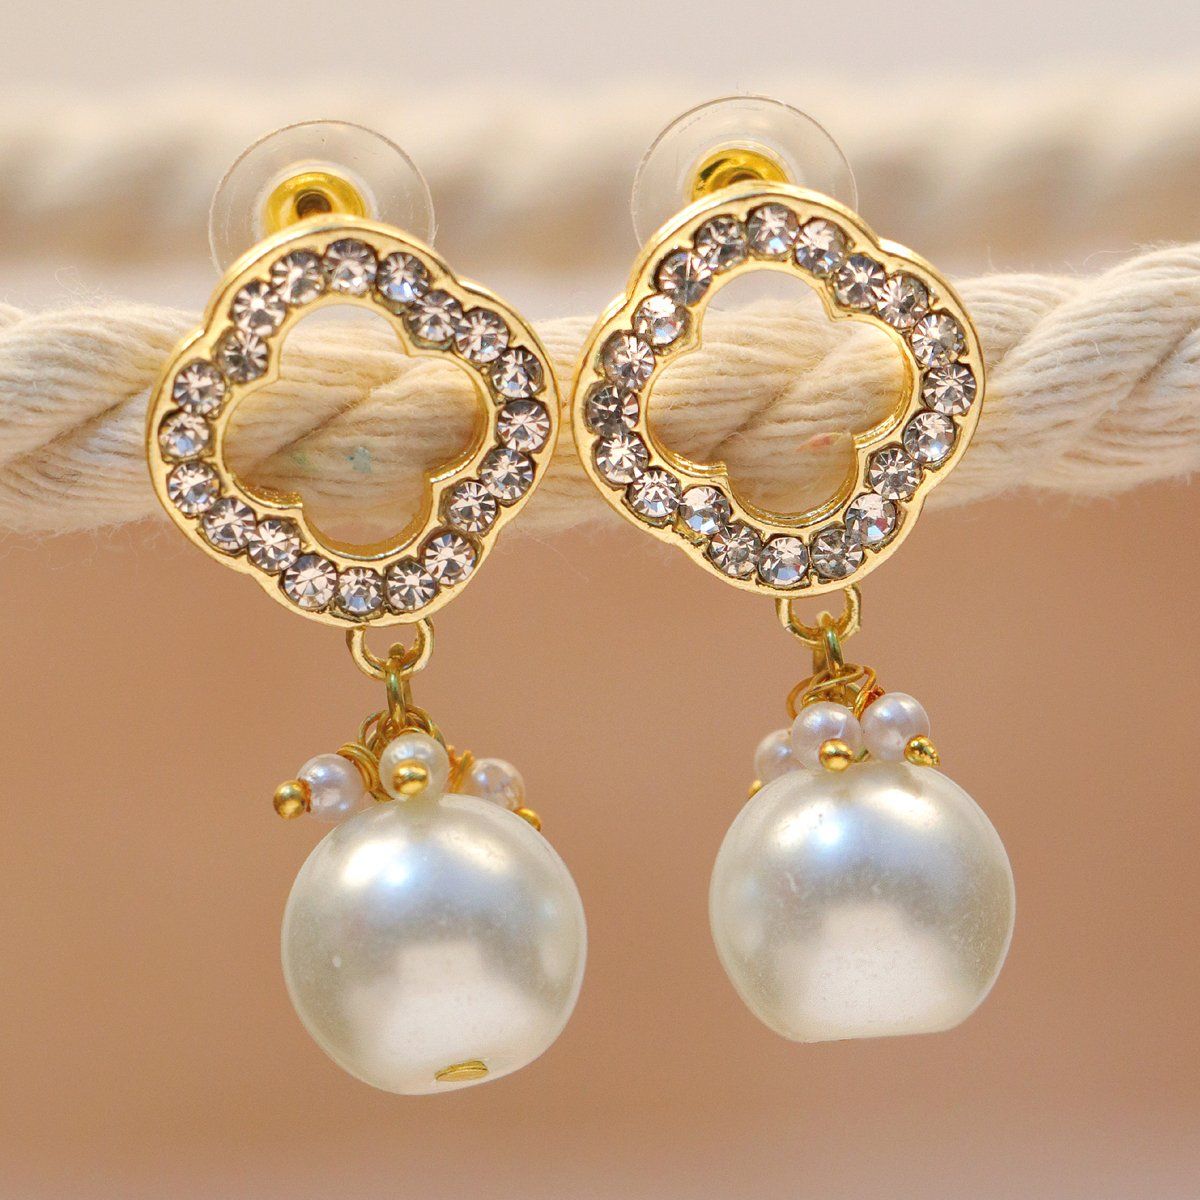 9ct Gold Pearl Drop Earrings in White | Angus & Coote